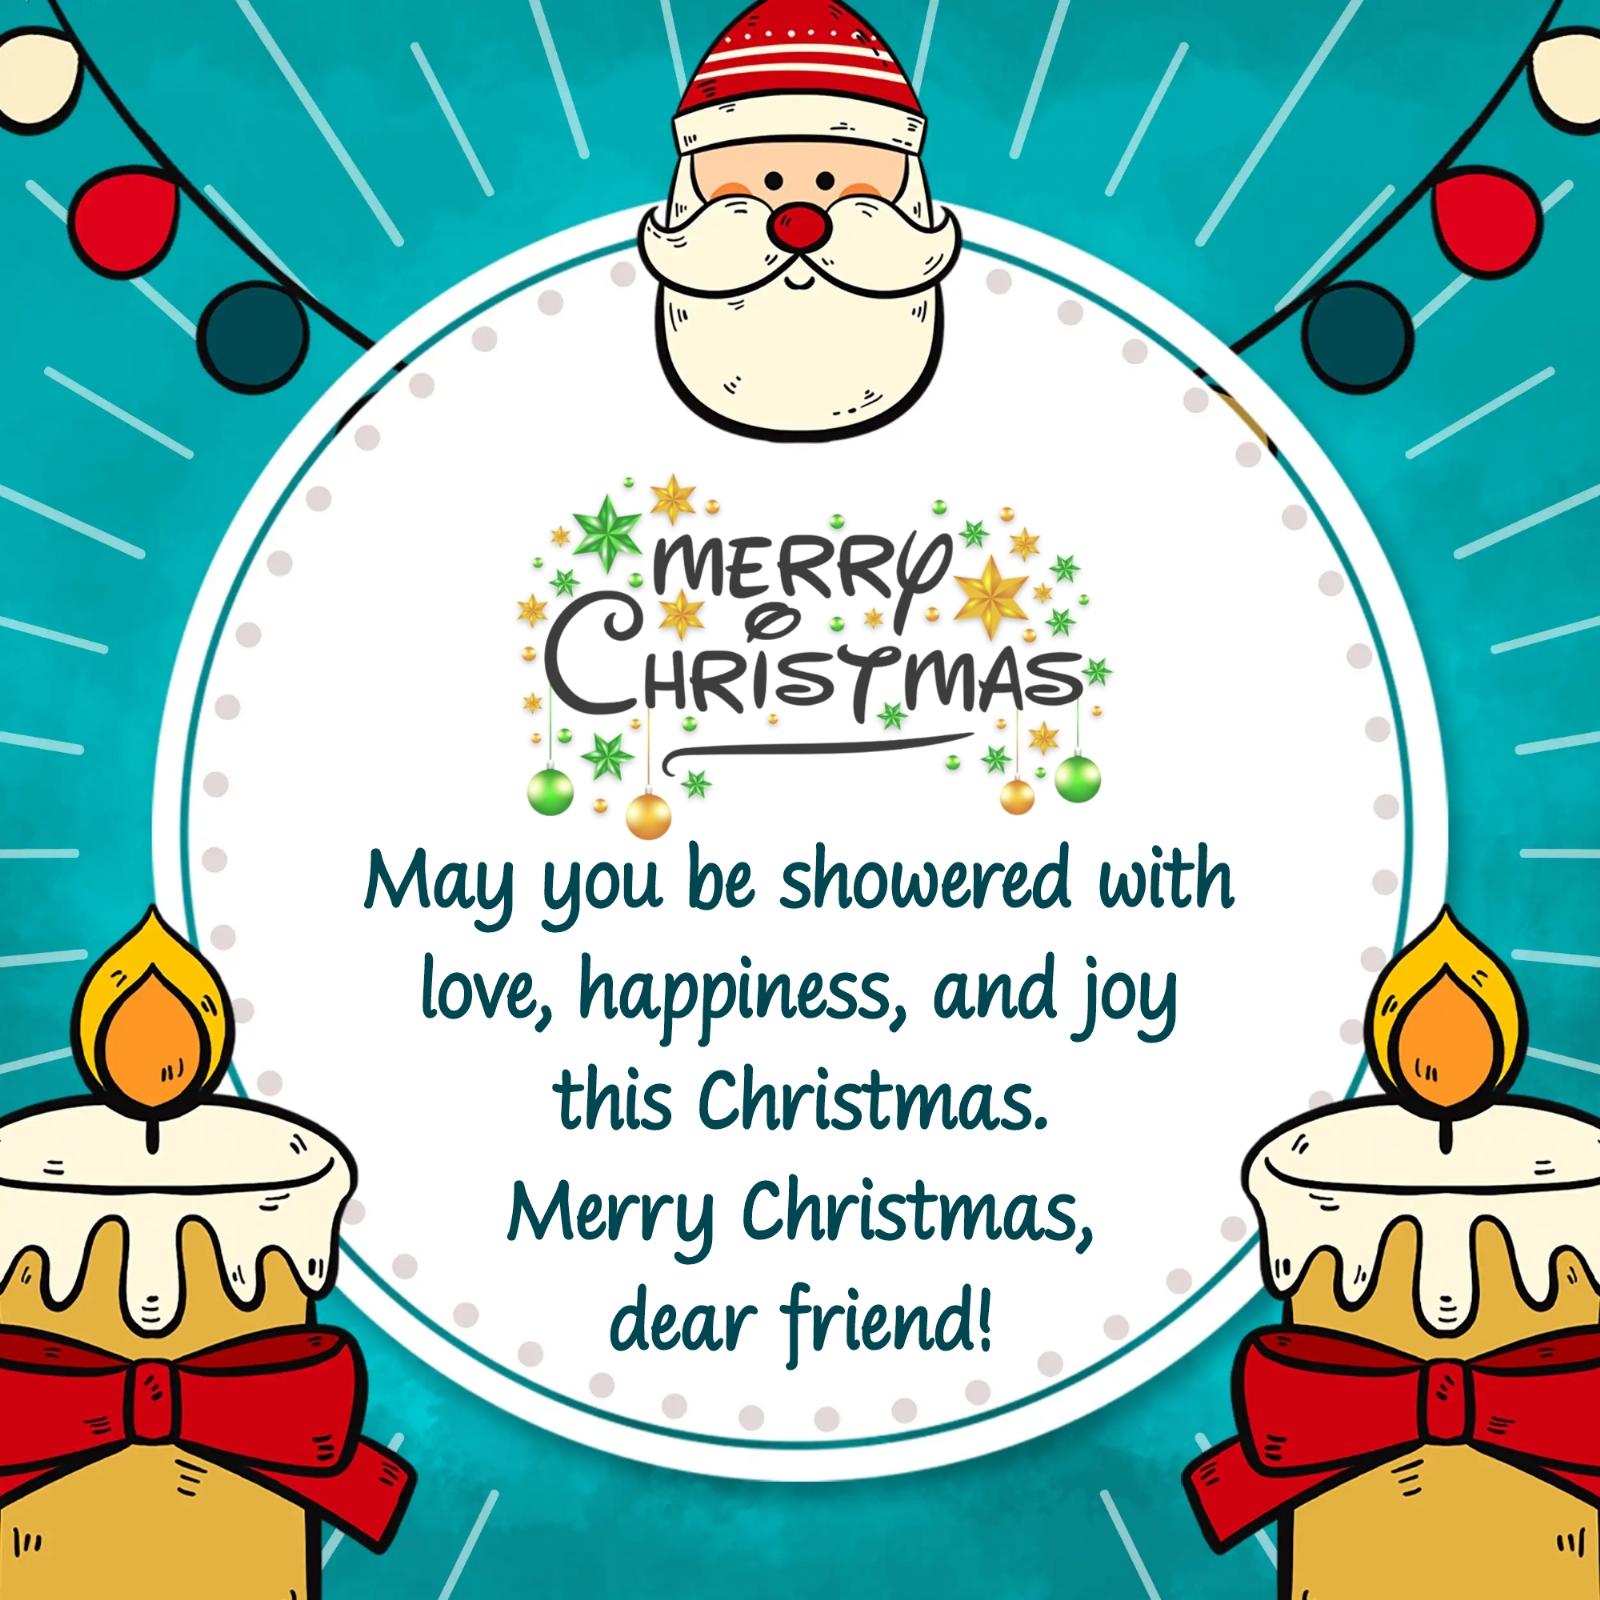 May you be showered with love happiness and joy